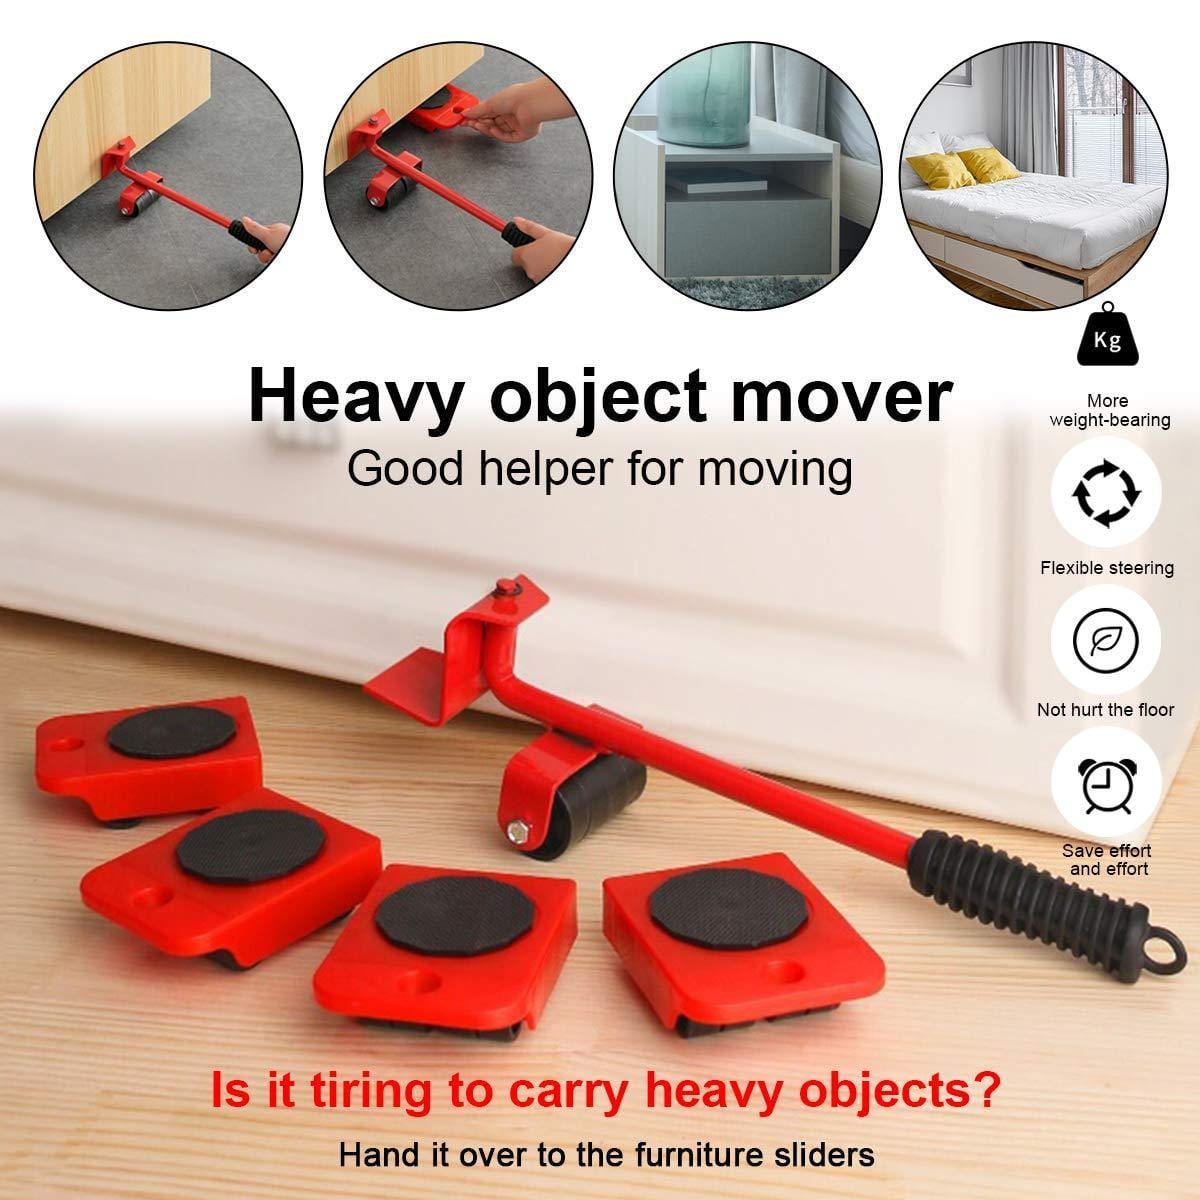 Heavy-Furniture-Lifter-Movers-Kit-Easy-Sliders-Roller-Tool-Moving-Appliance-Lifter-Transport-Shifter-Wheel-Lift_9288653b-17c0-46cb-99fd-2886afff2a03